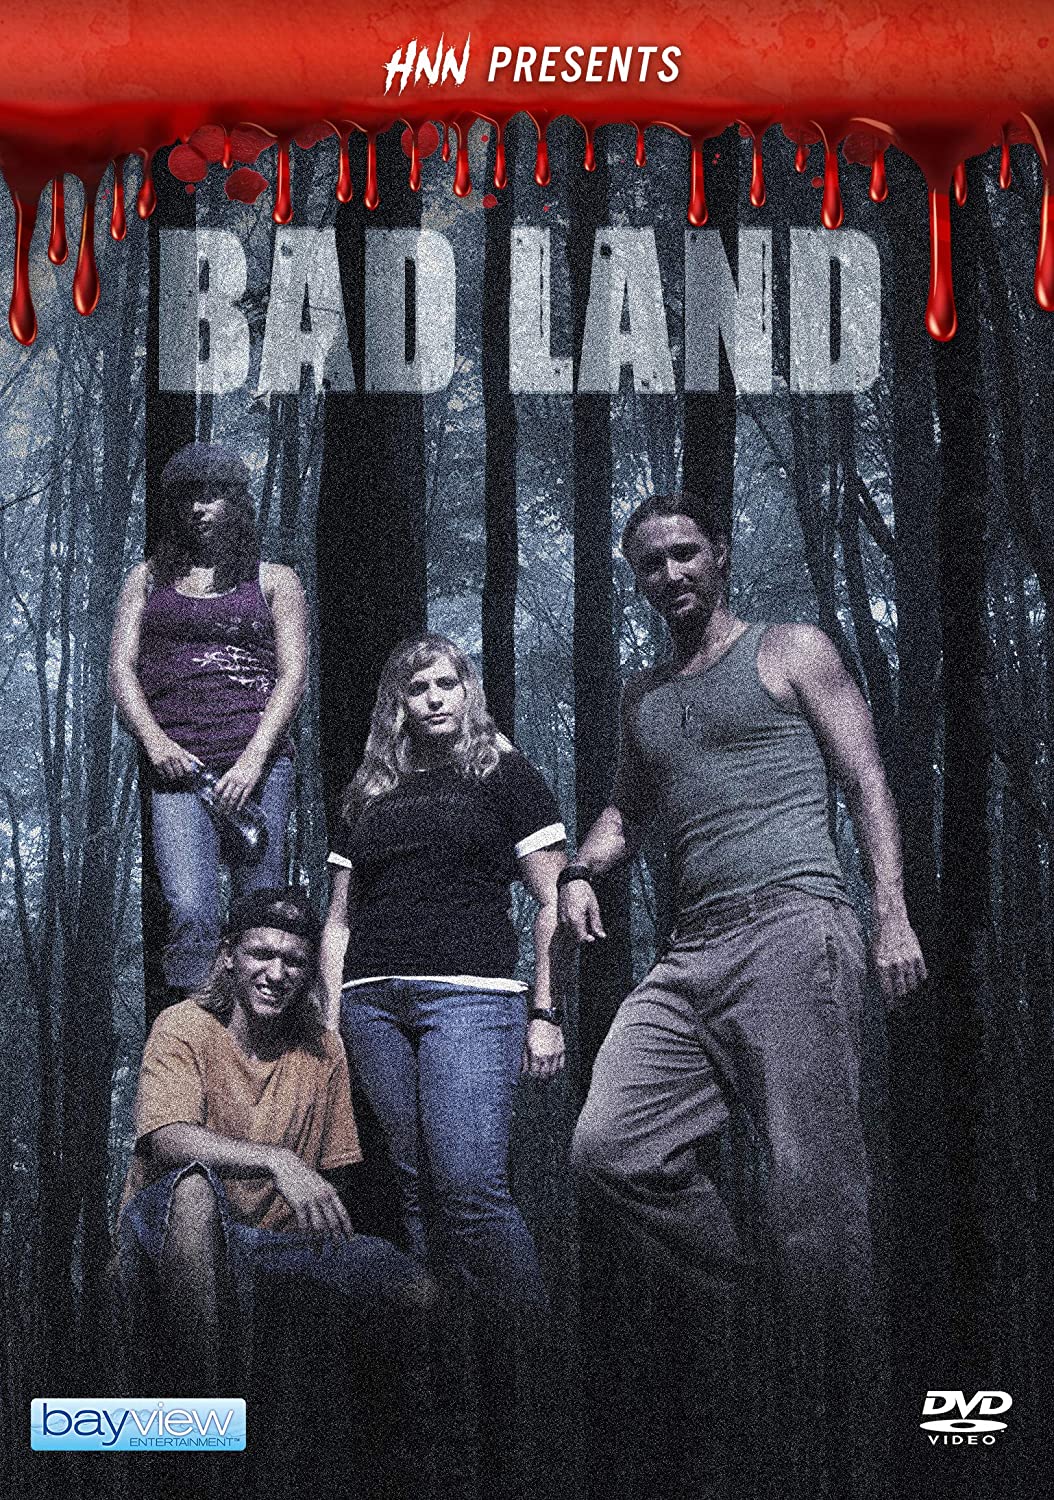 Official Trailer for HNN Presents: Bad Land